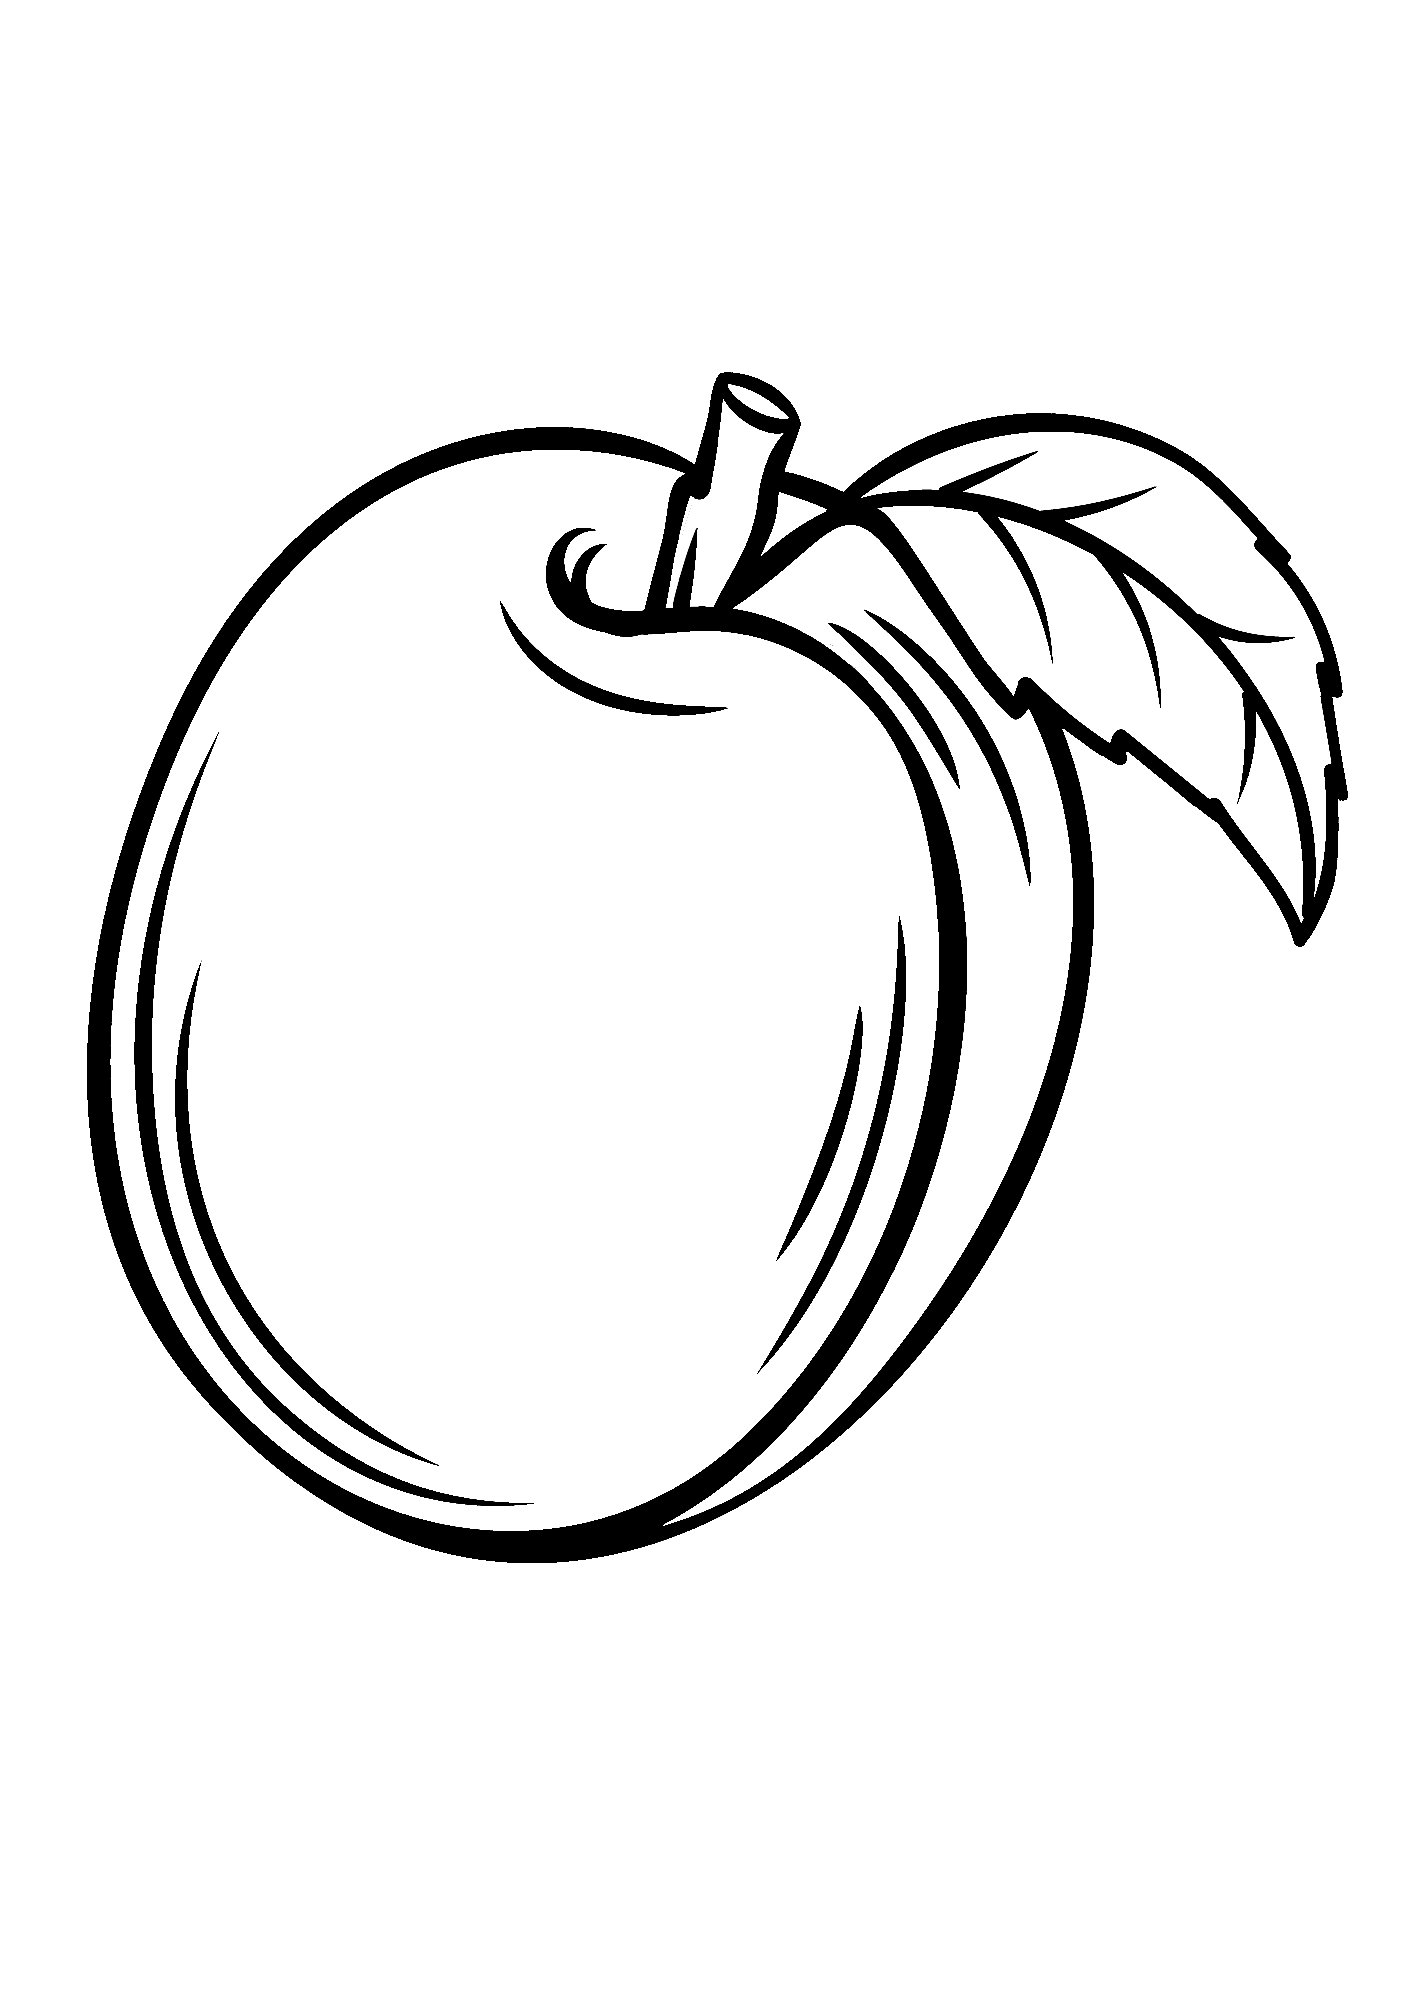 Apricot Picture For Kids Coloring Pages